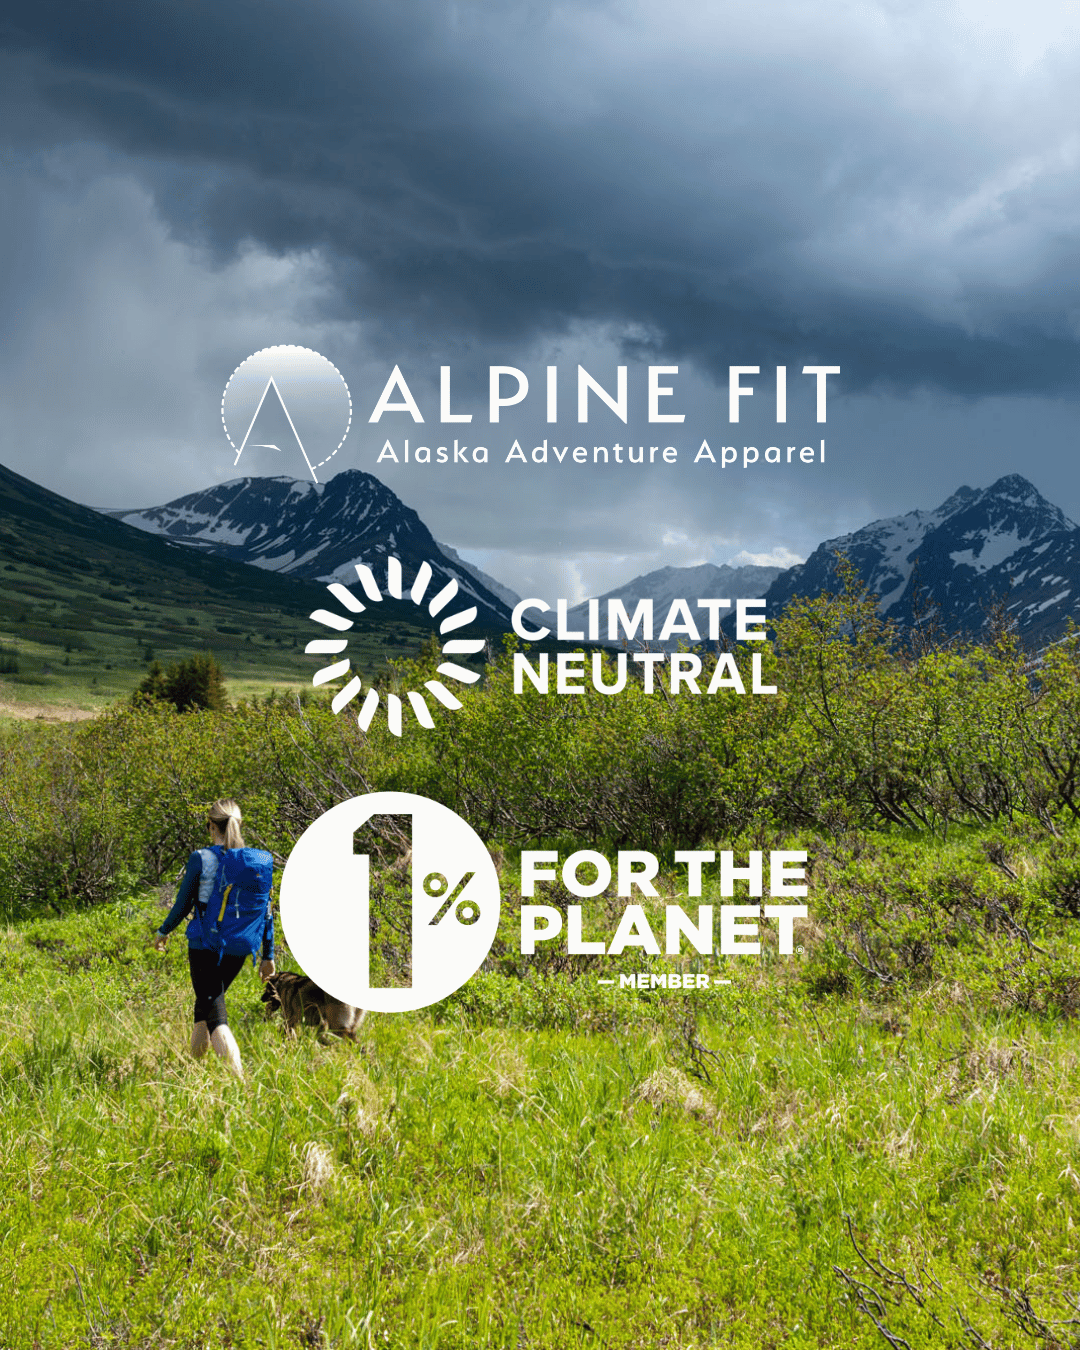 alpine fit one percent for the planet climate neutral